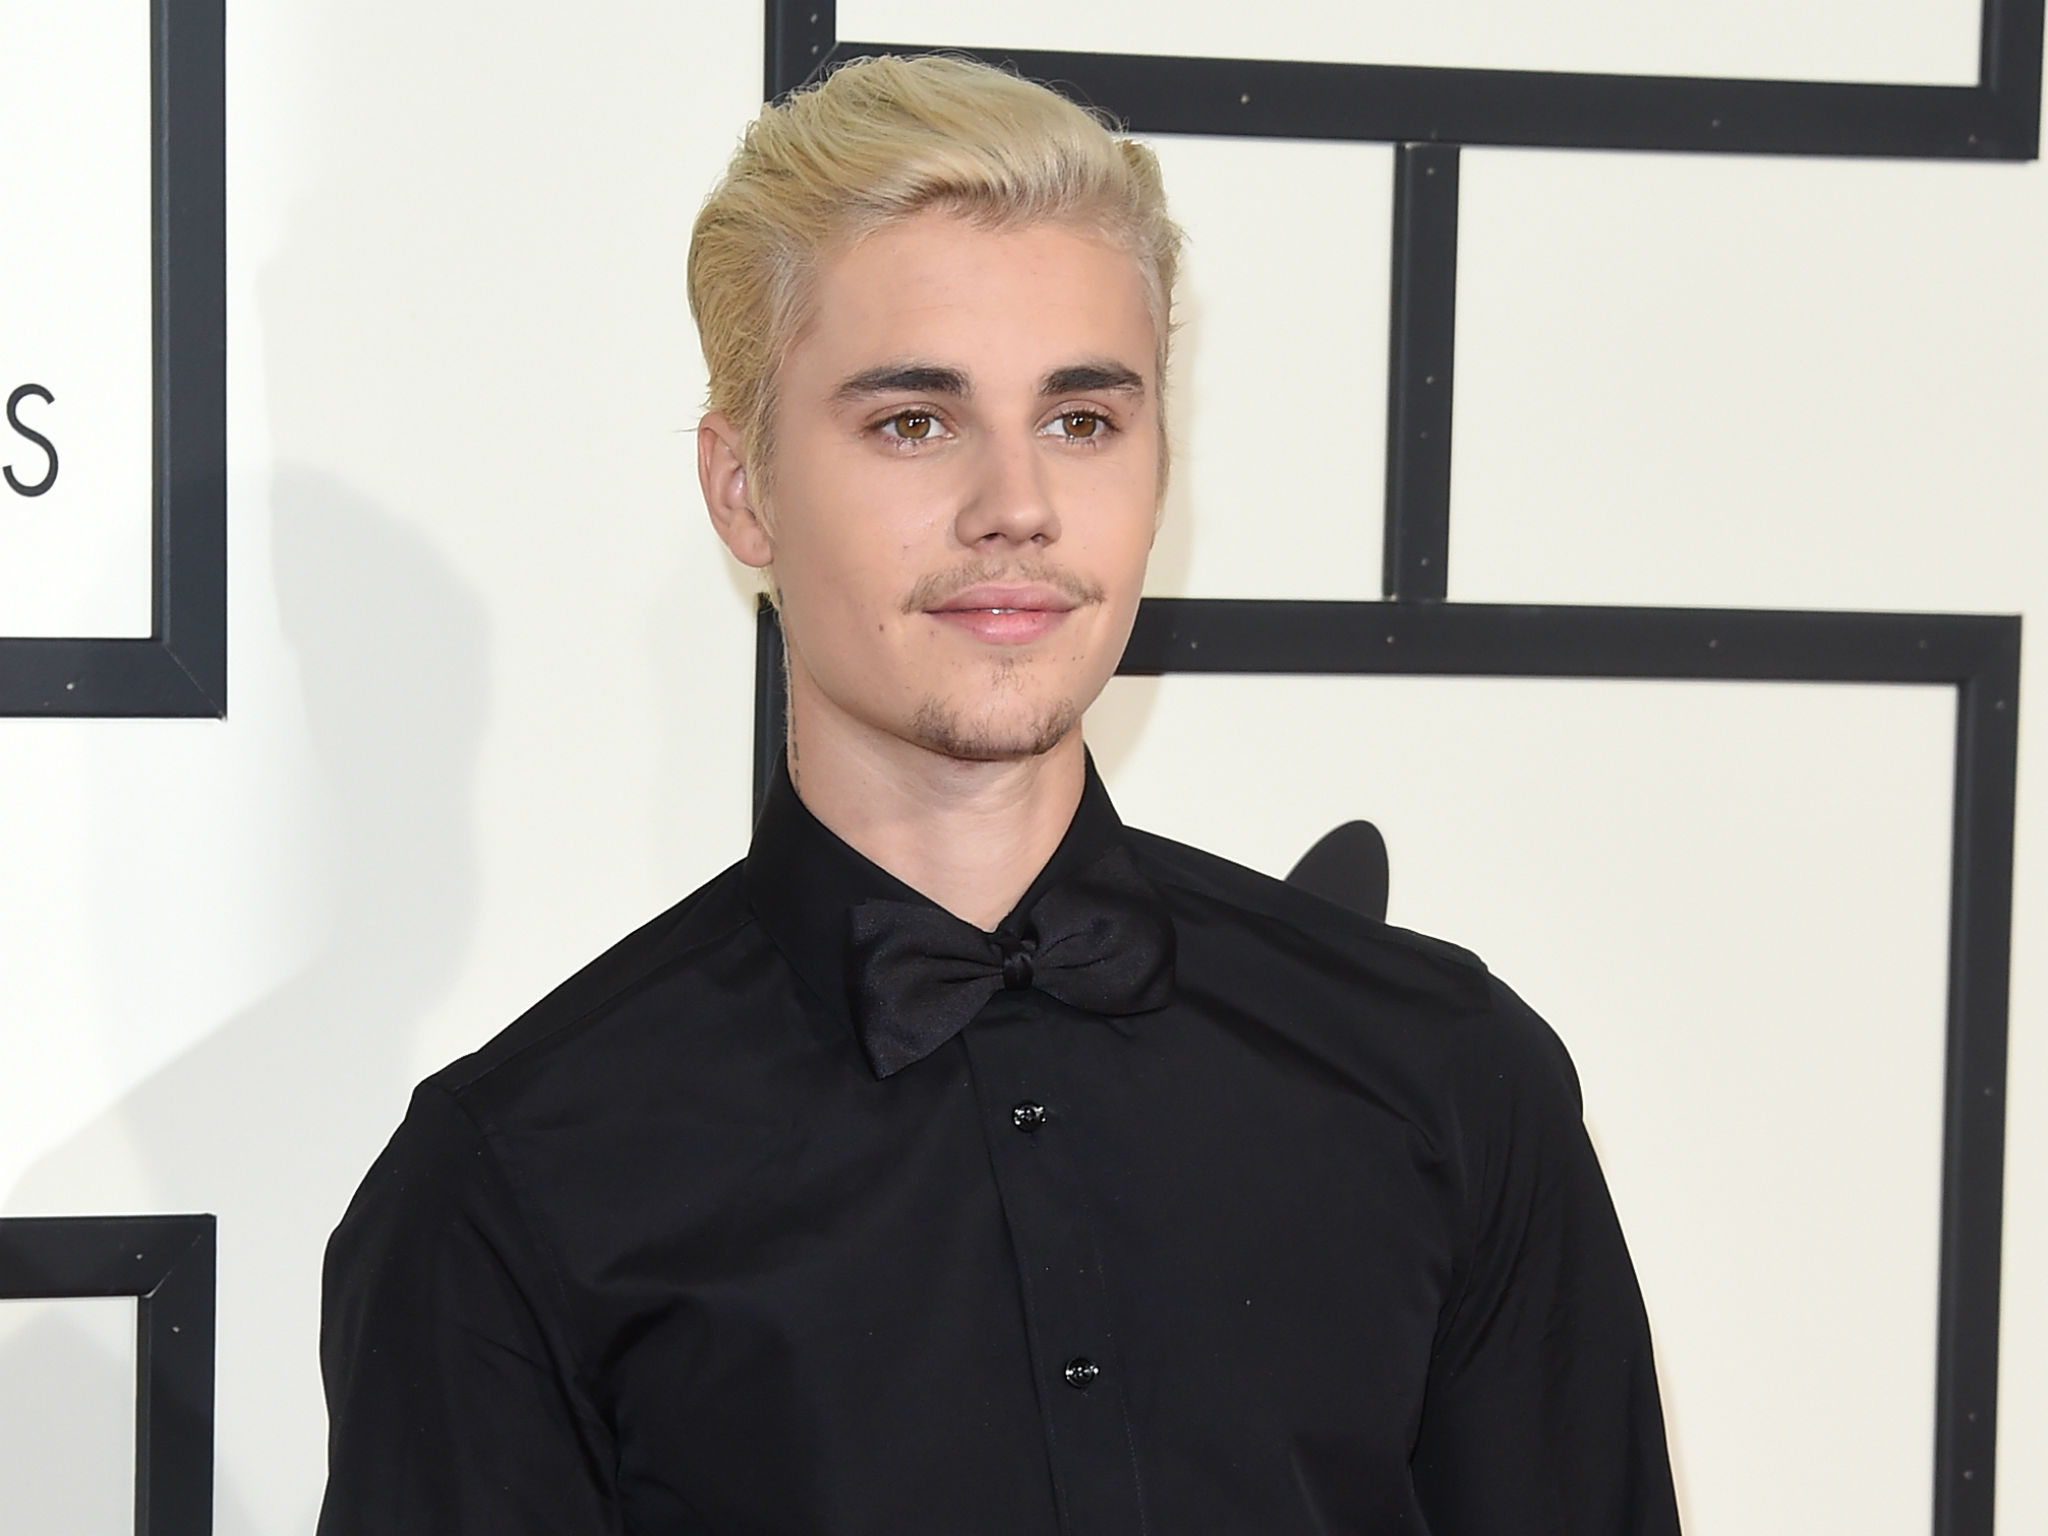 Download Px Justin Bieber Hd Wallpapers For Free - Justin Bieber Draco Malfoy - HD Wallpaper 